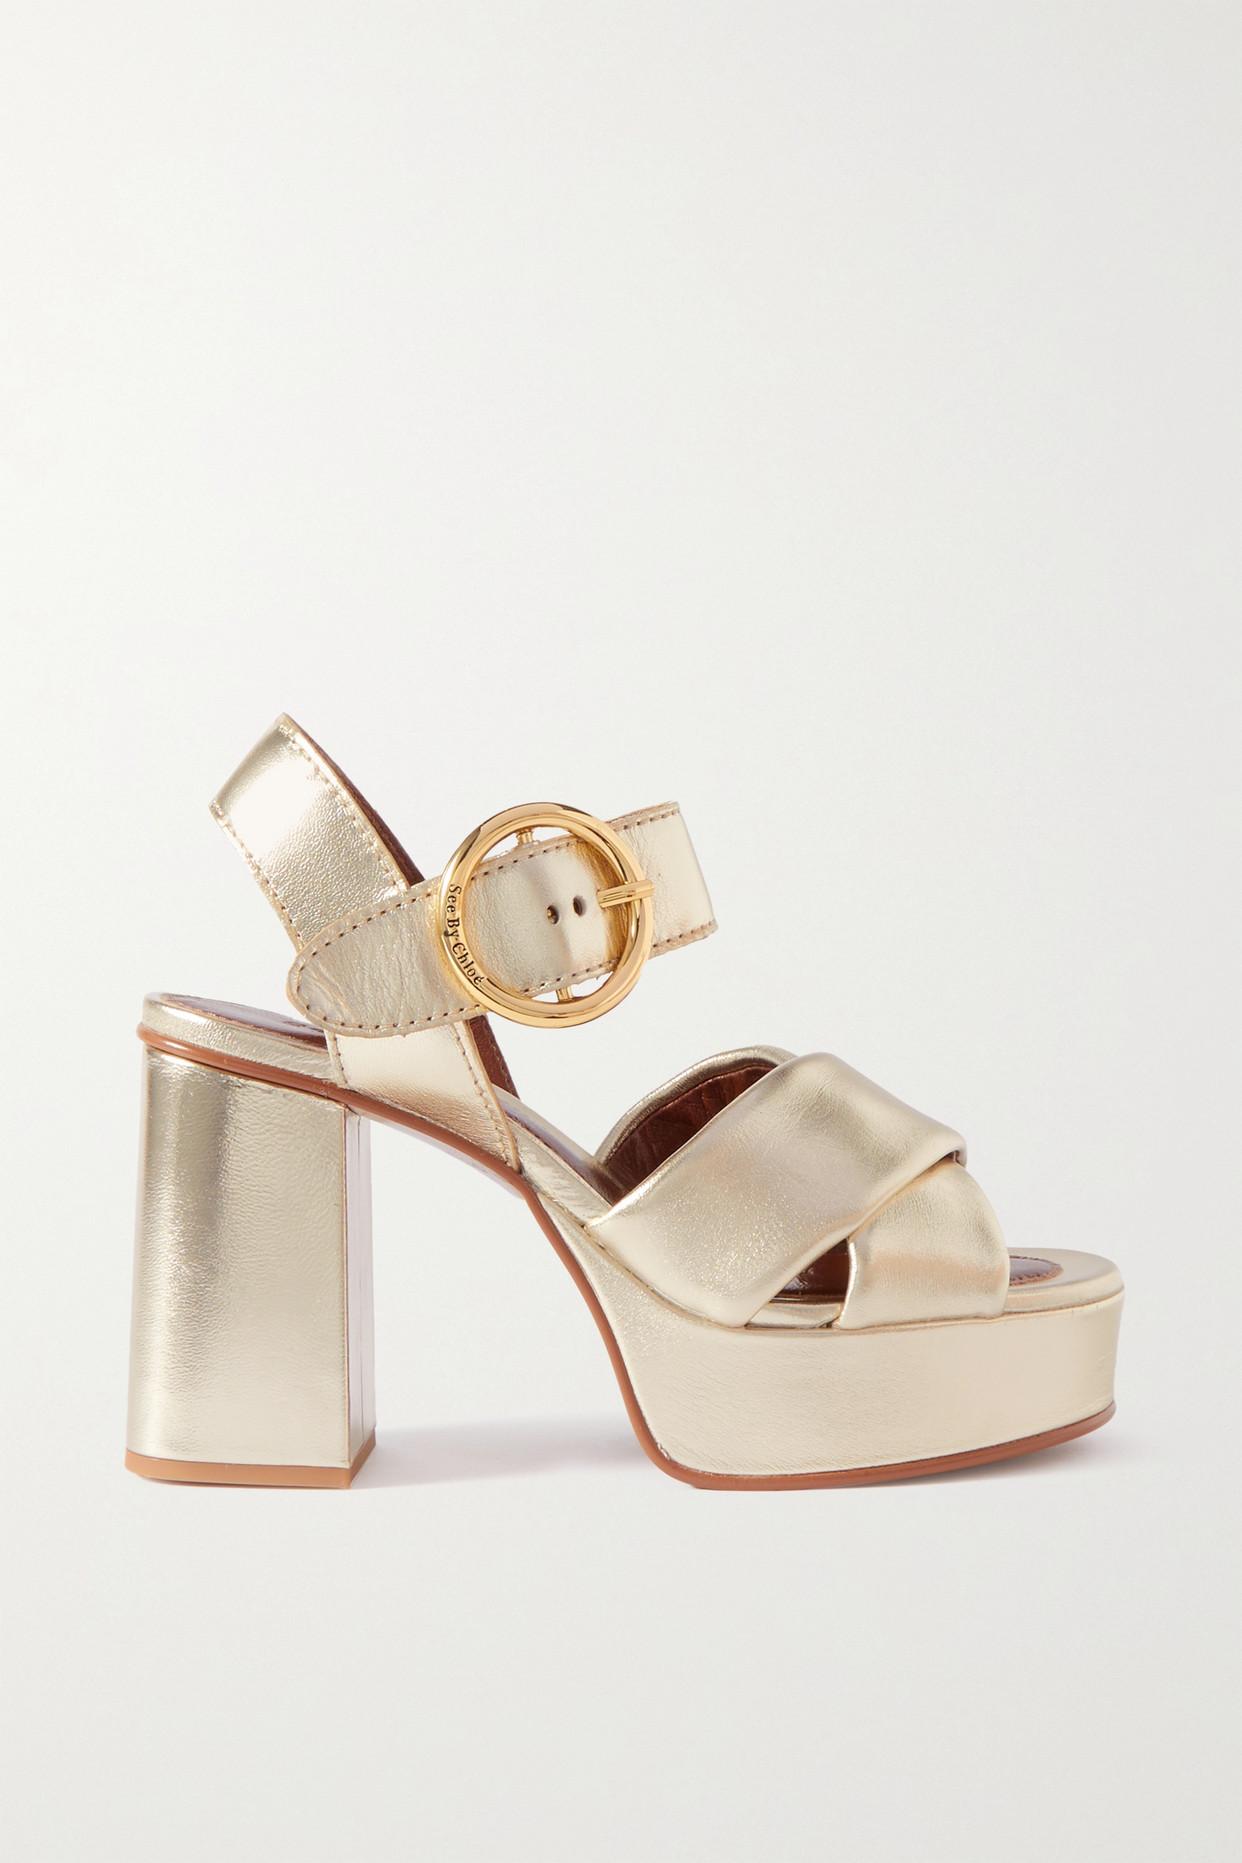 See By Chloé Lyna Metallic Leather Platform Sandals in Natural | Lyst